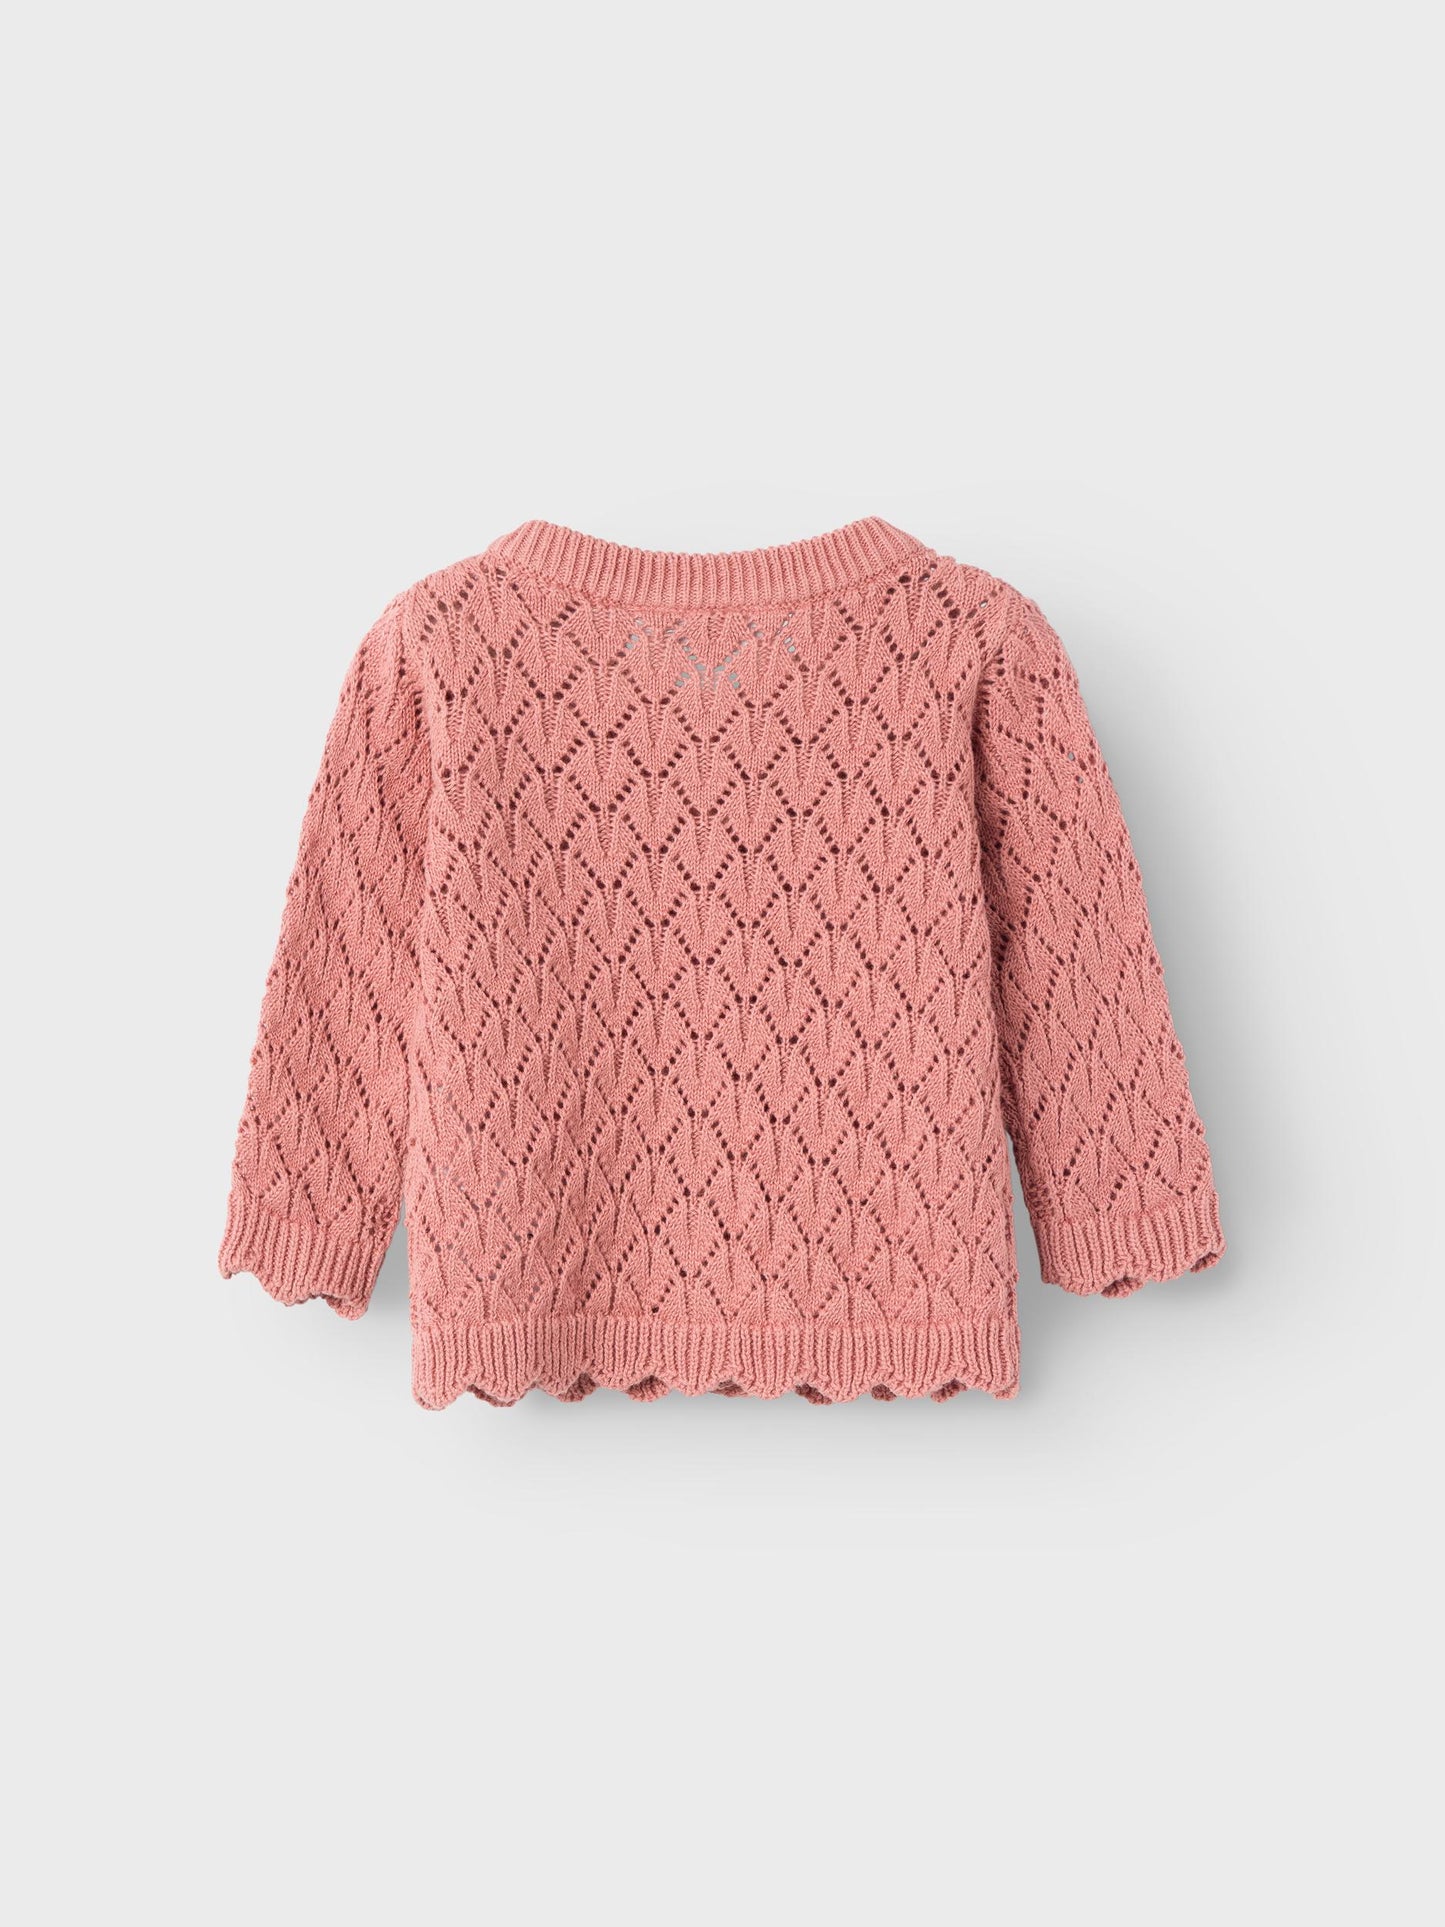 Name it - Knitted vest - Ash rose